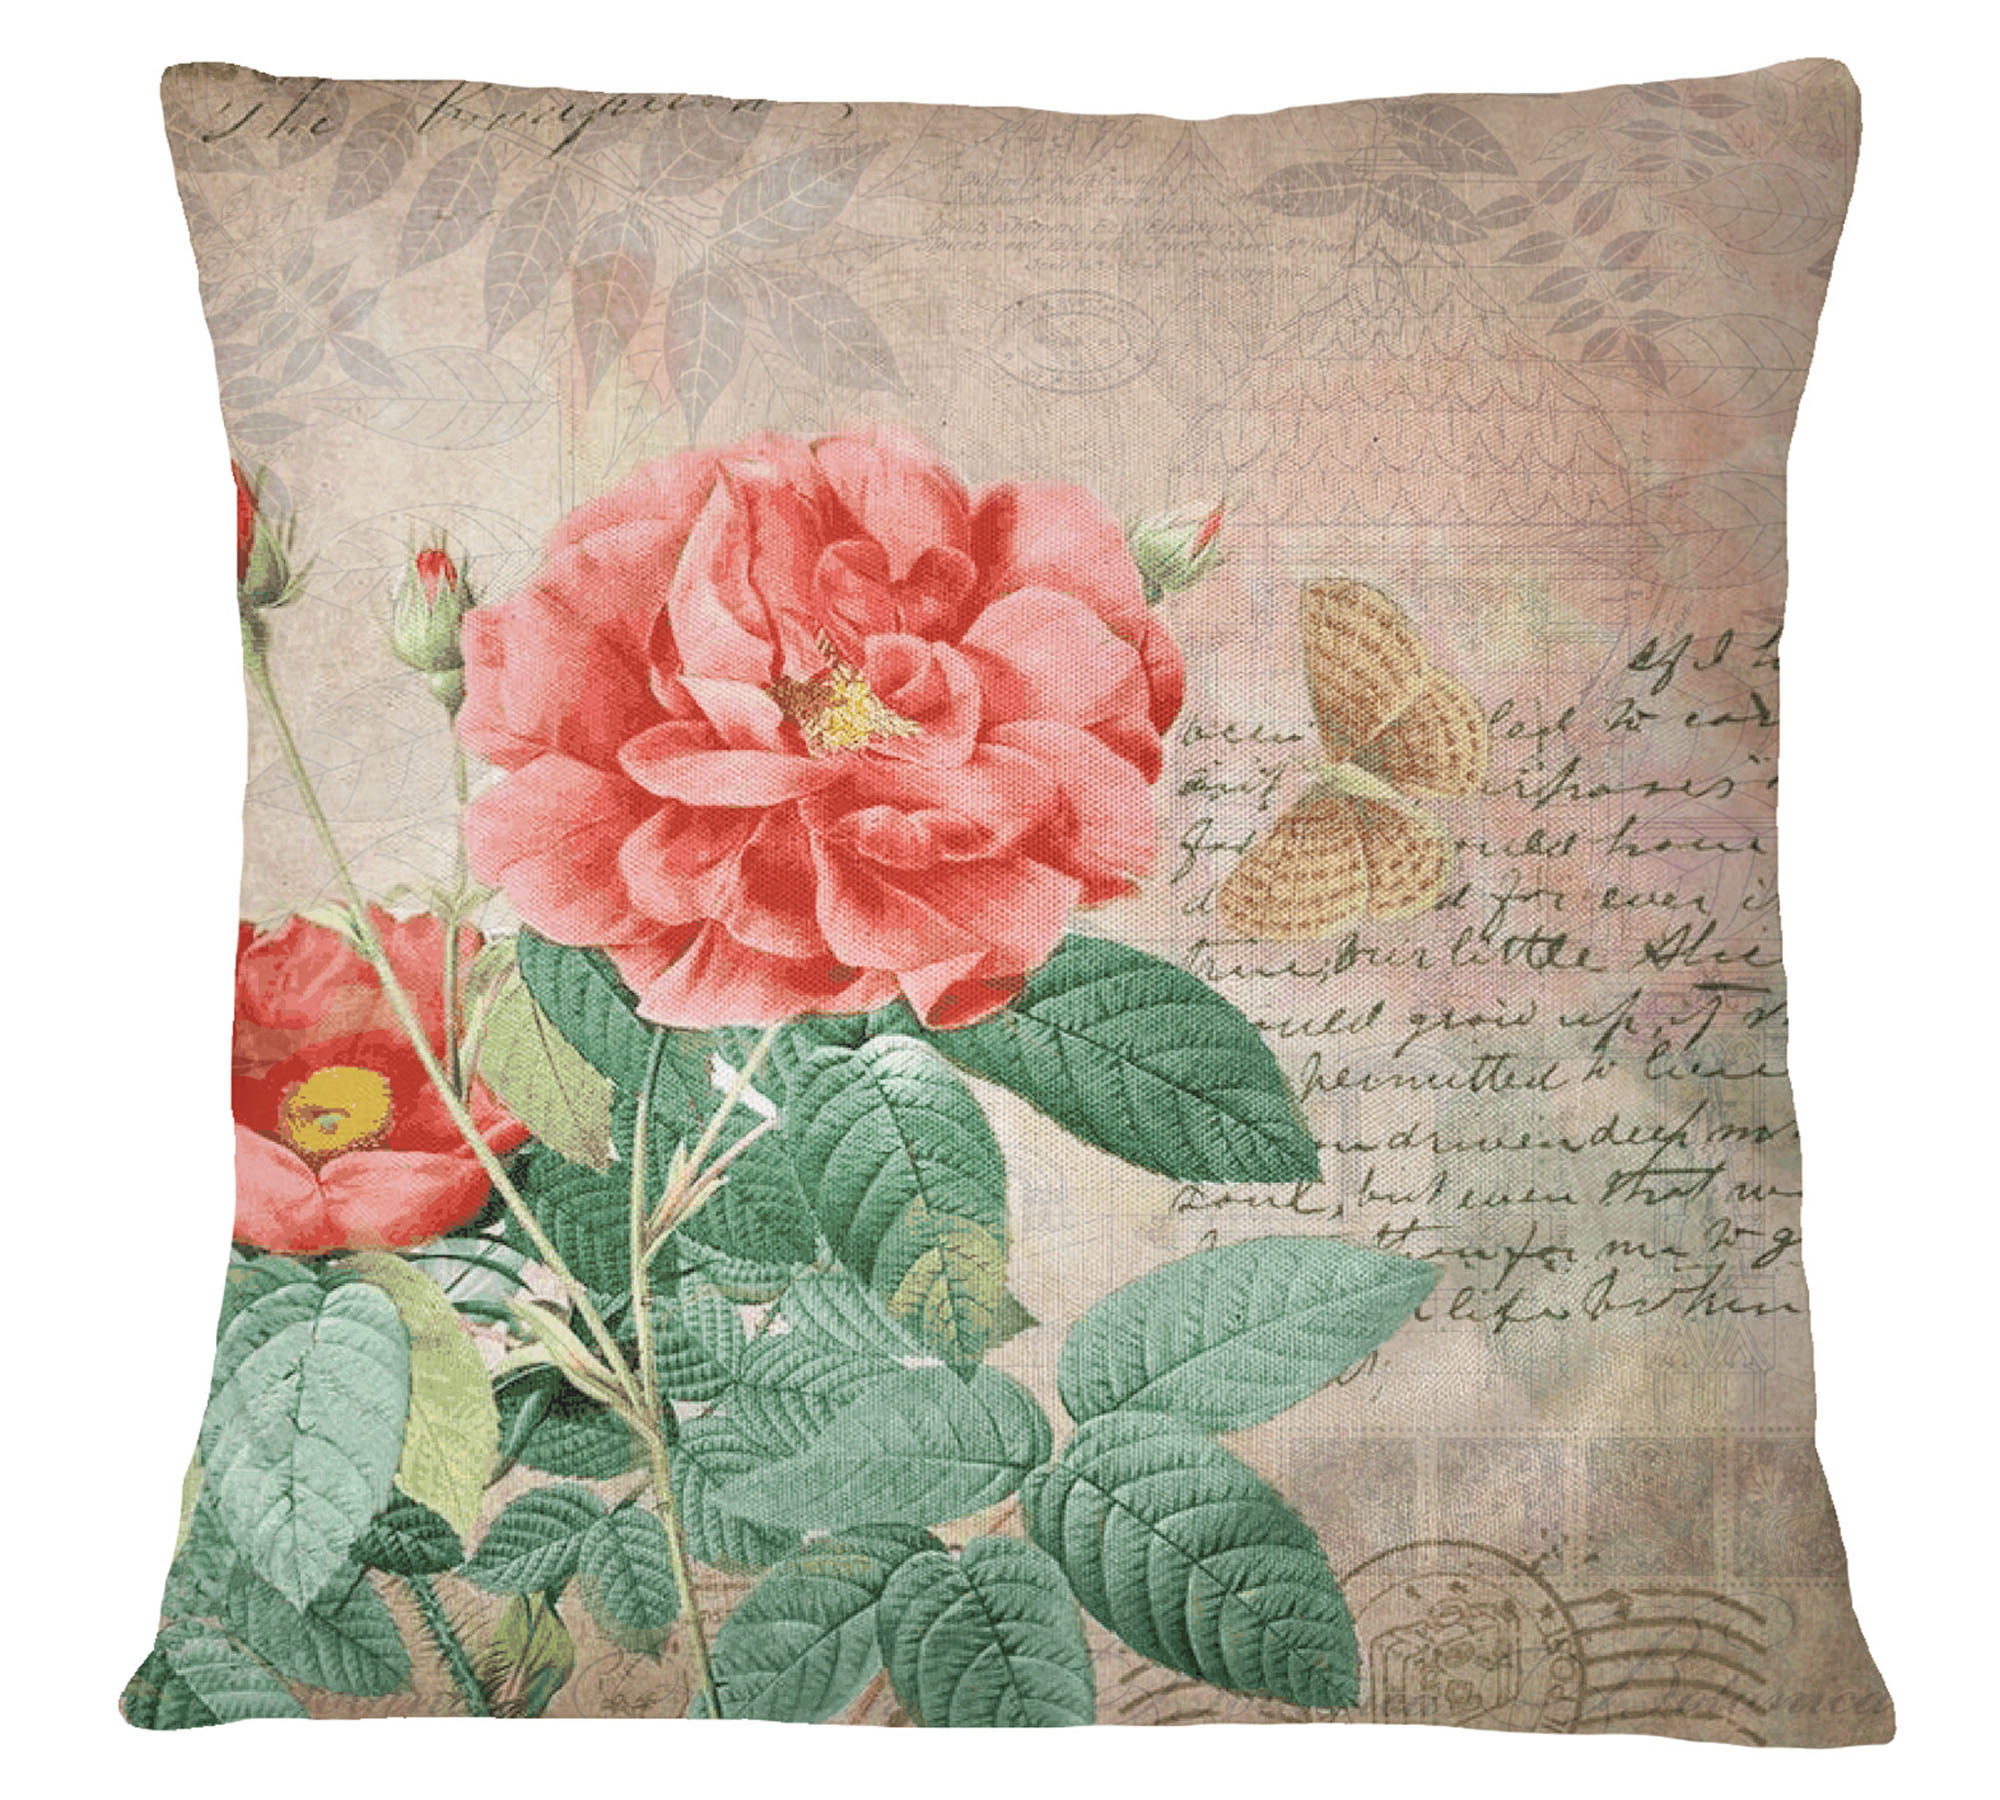 Details about   Big Peony Flower Shaped Pillows Luxury Cushion Cover Pillow Case Home Supplies 